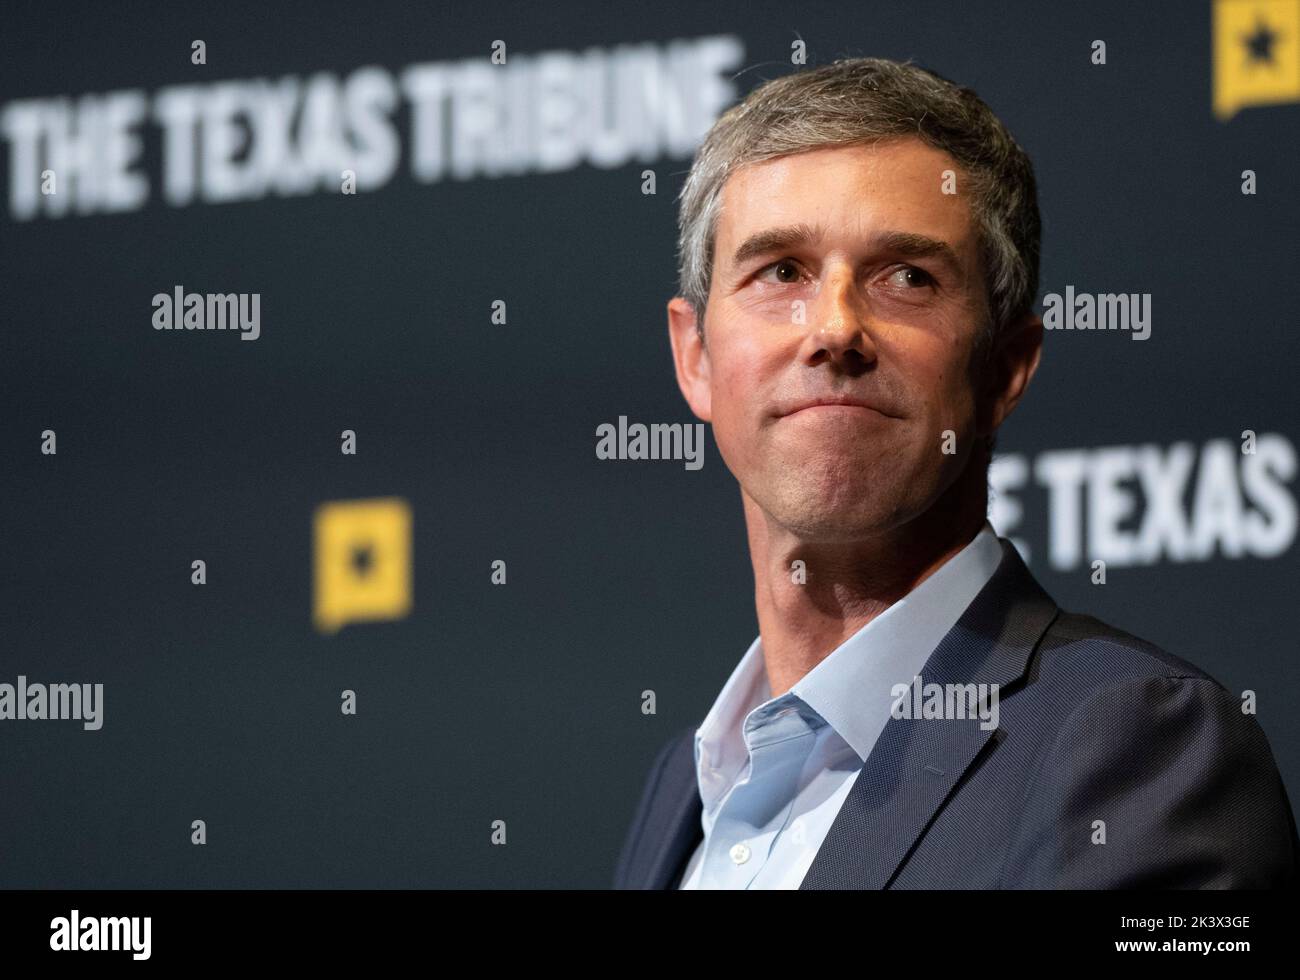 Democratic nominee for governor of Texas BETO O'ROURKE speaks during an interview session at the annual Texas Tribune Festival in downtown Austin on September 24, 2022.  O'Rourke is a former congressman from El Paso. Stock Photo